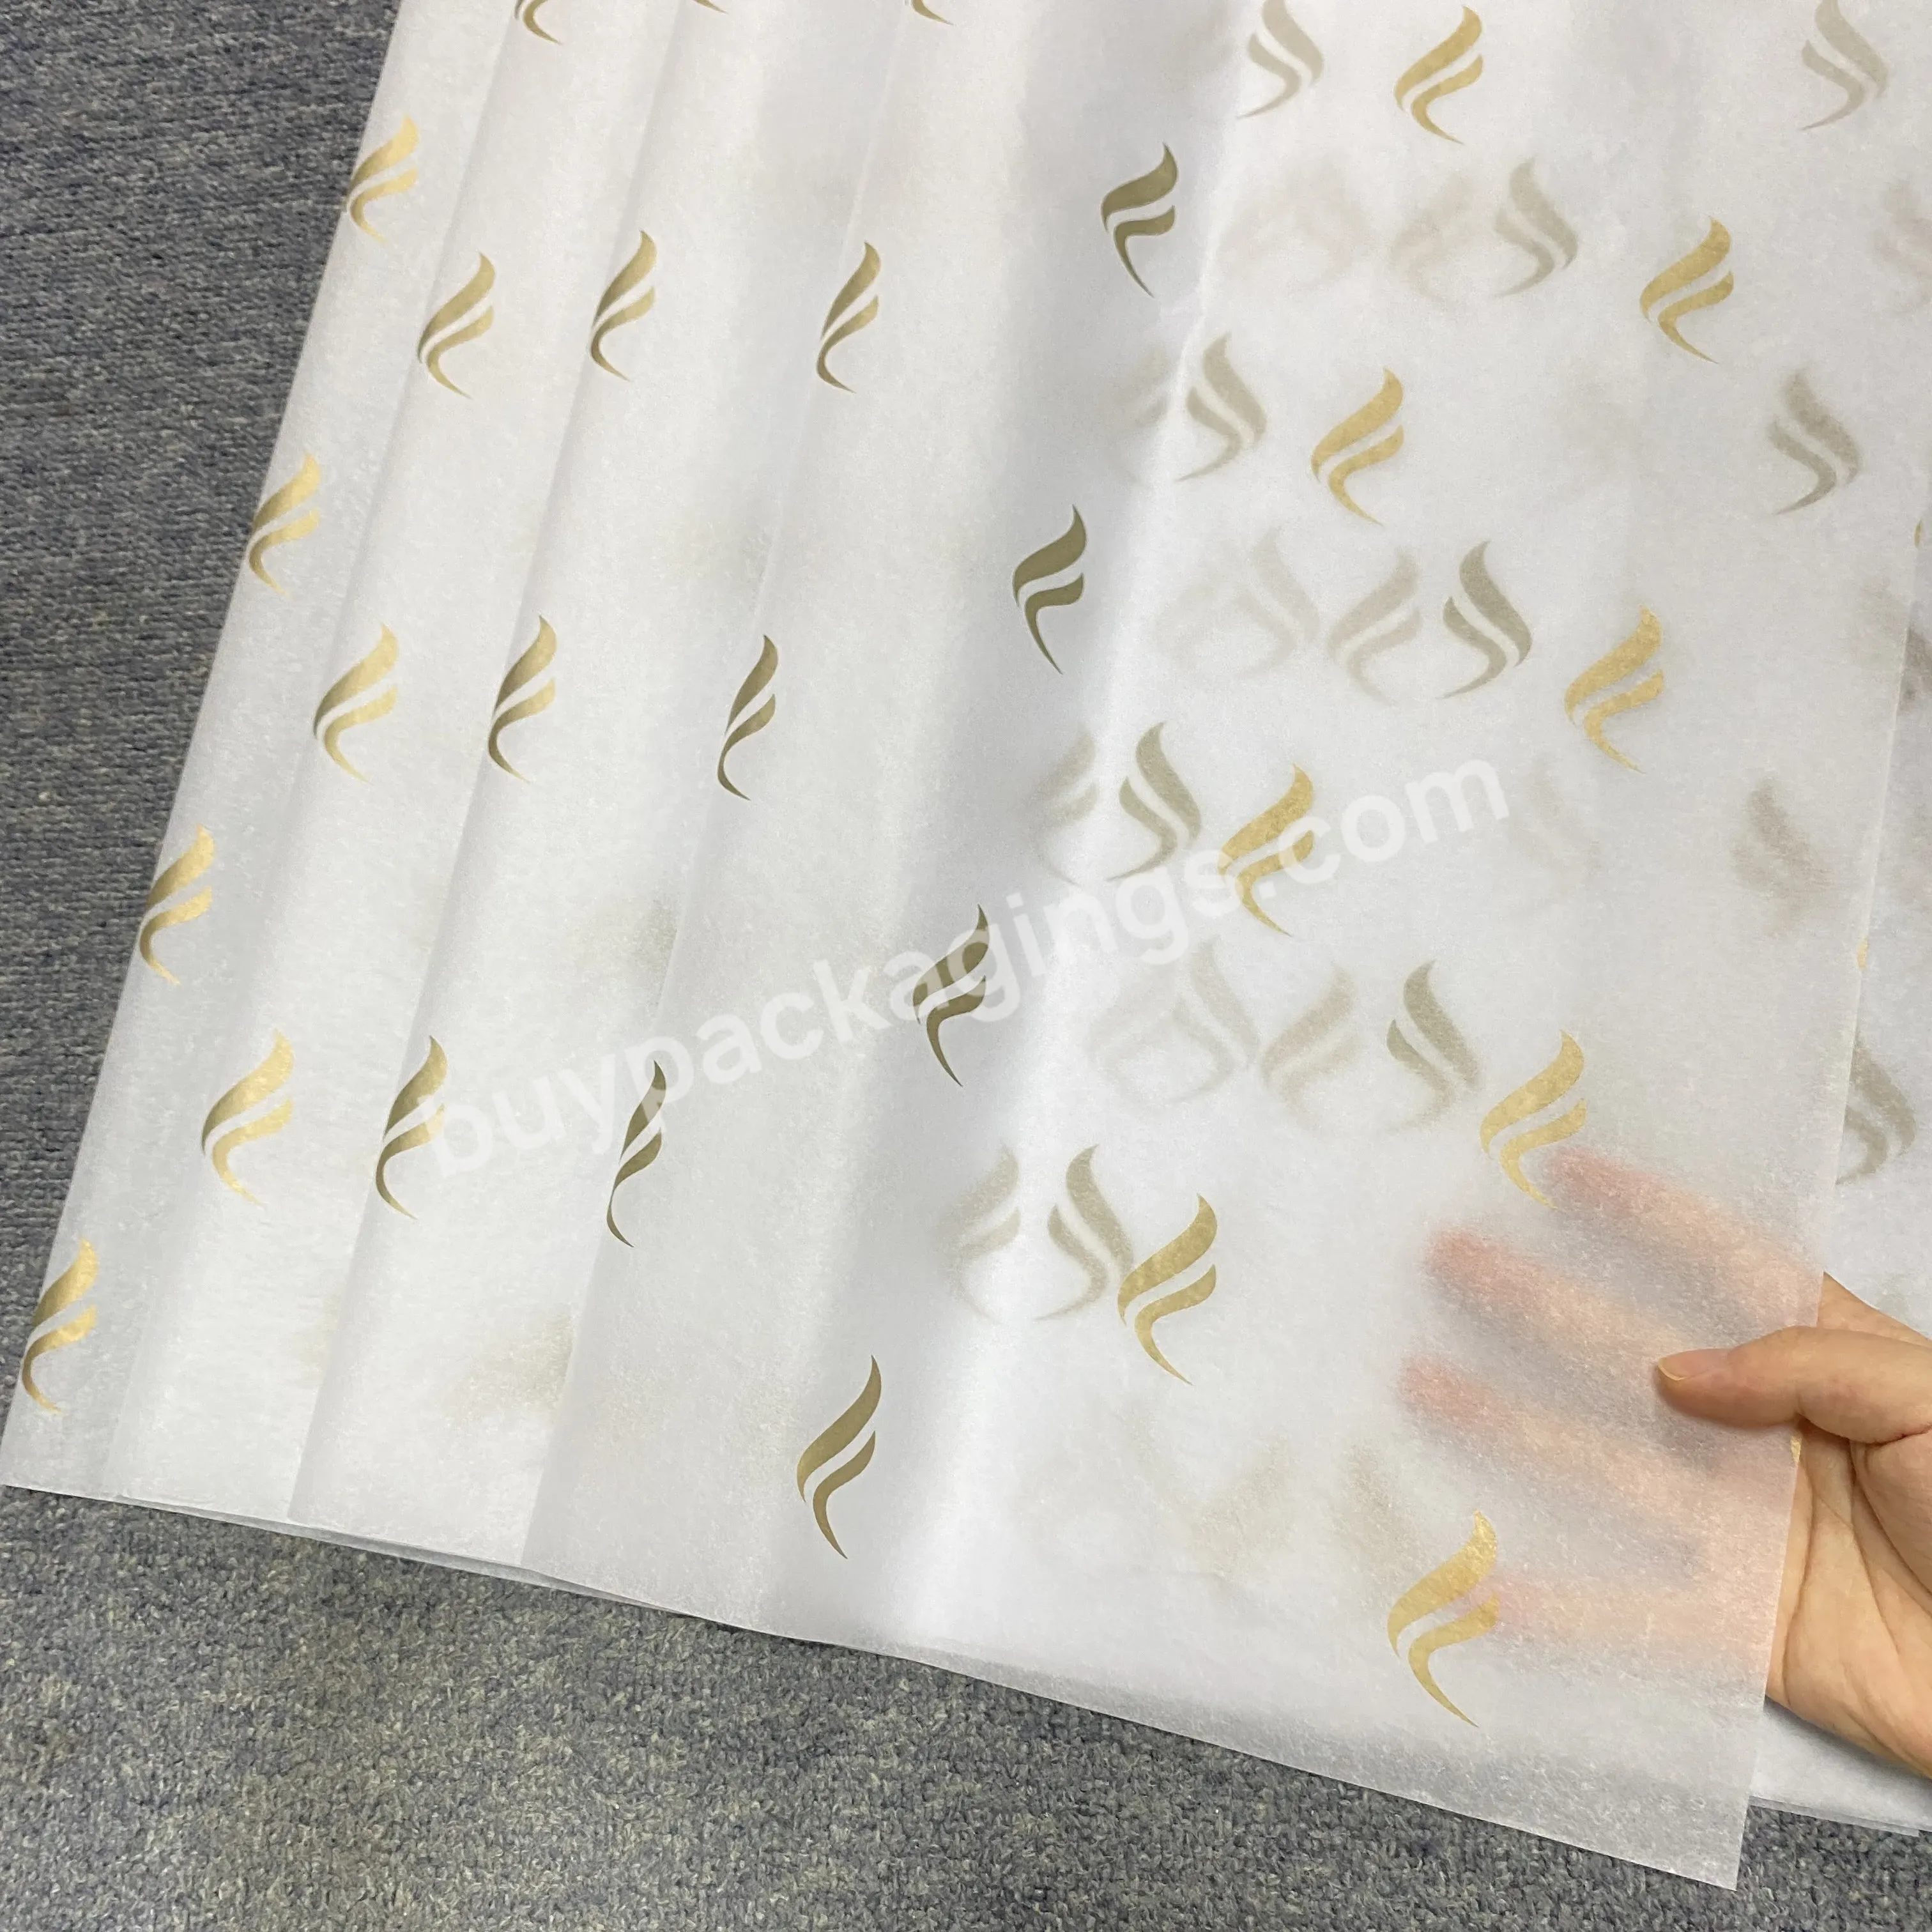 Fashionable Custom Printed Logo Tissue Wrapping Paper For Trending Products Packaging Clothes